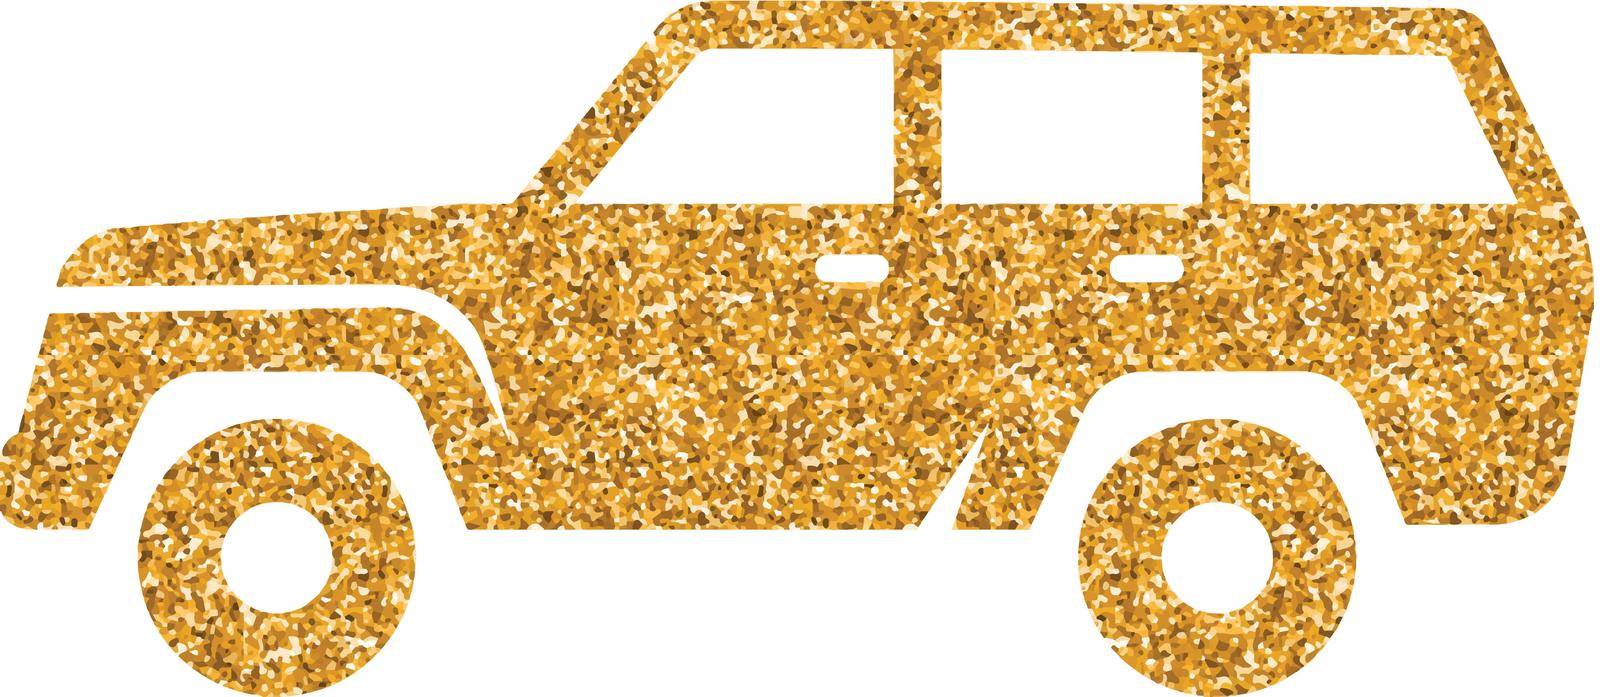 Car icon in gold glitter texture. Sparkle luxury style vector illustration.